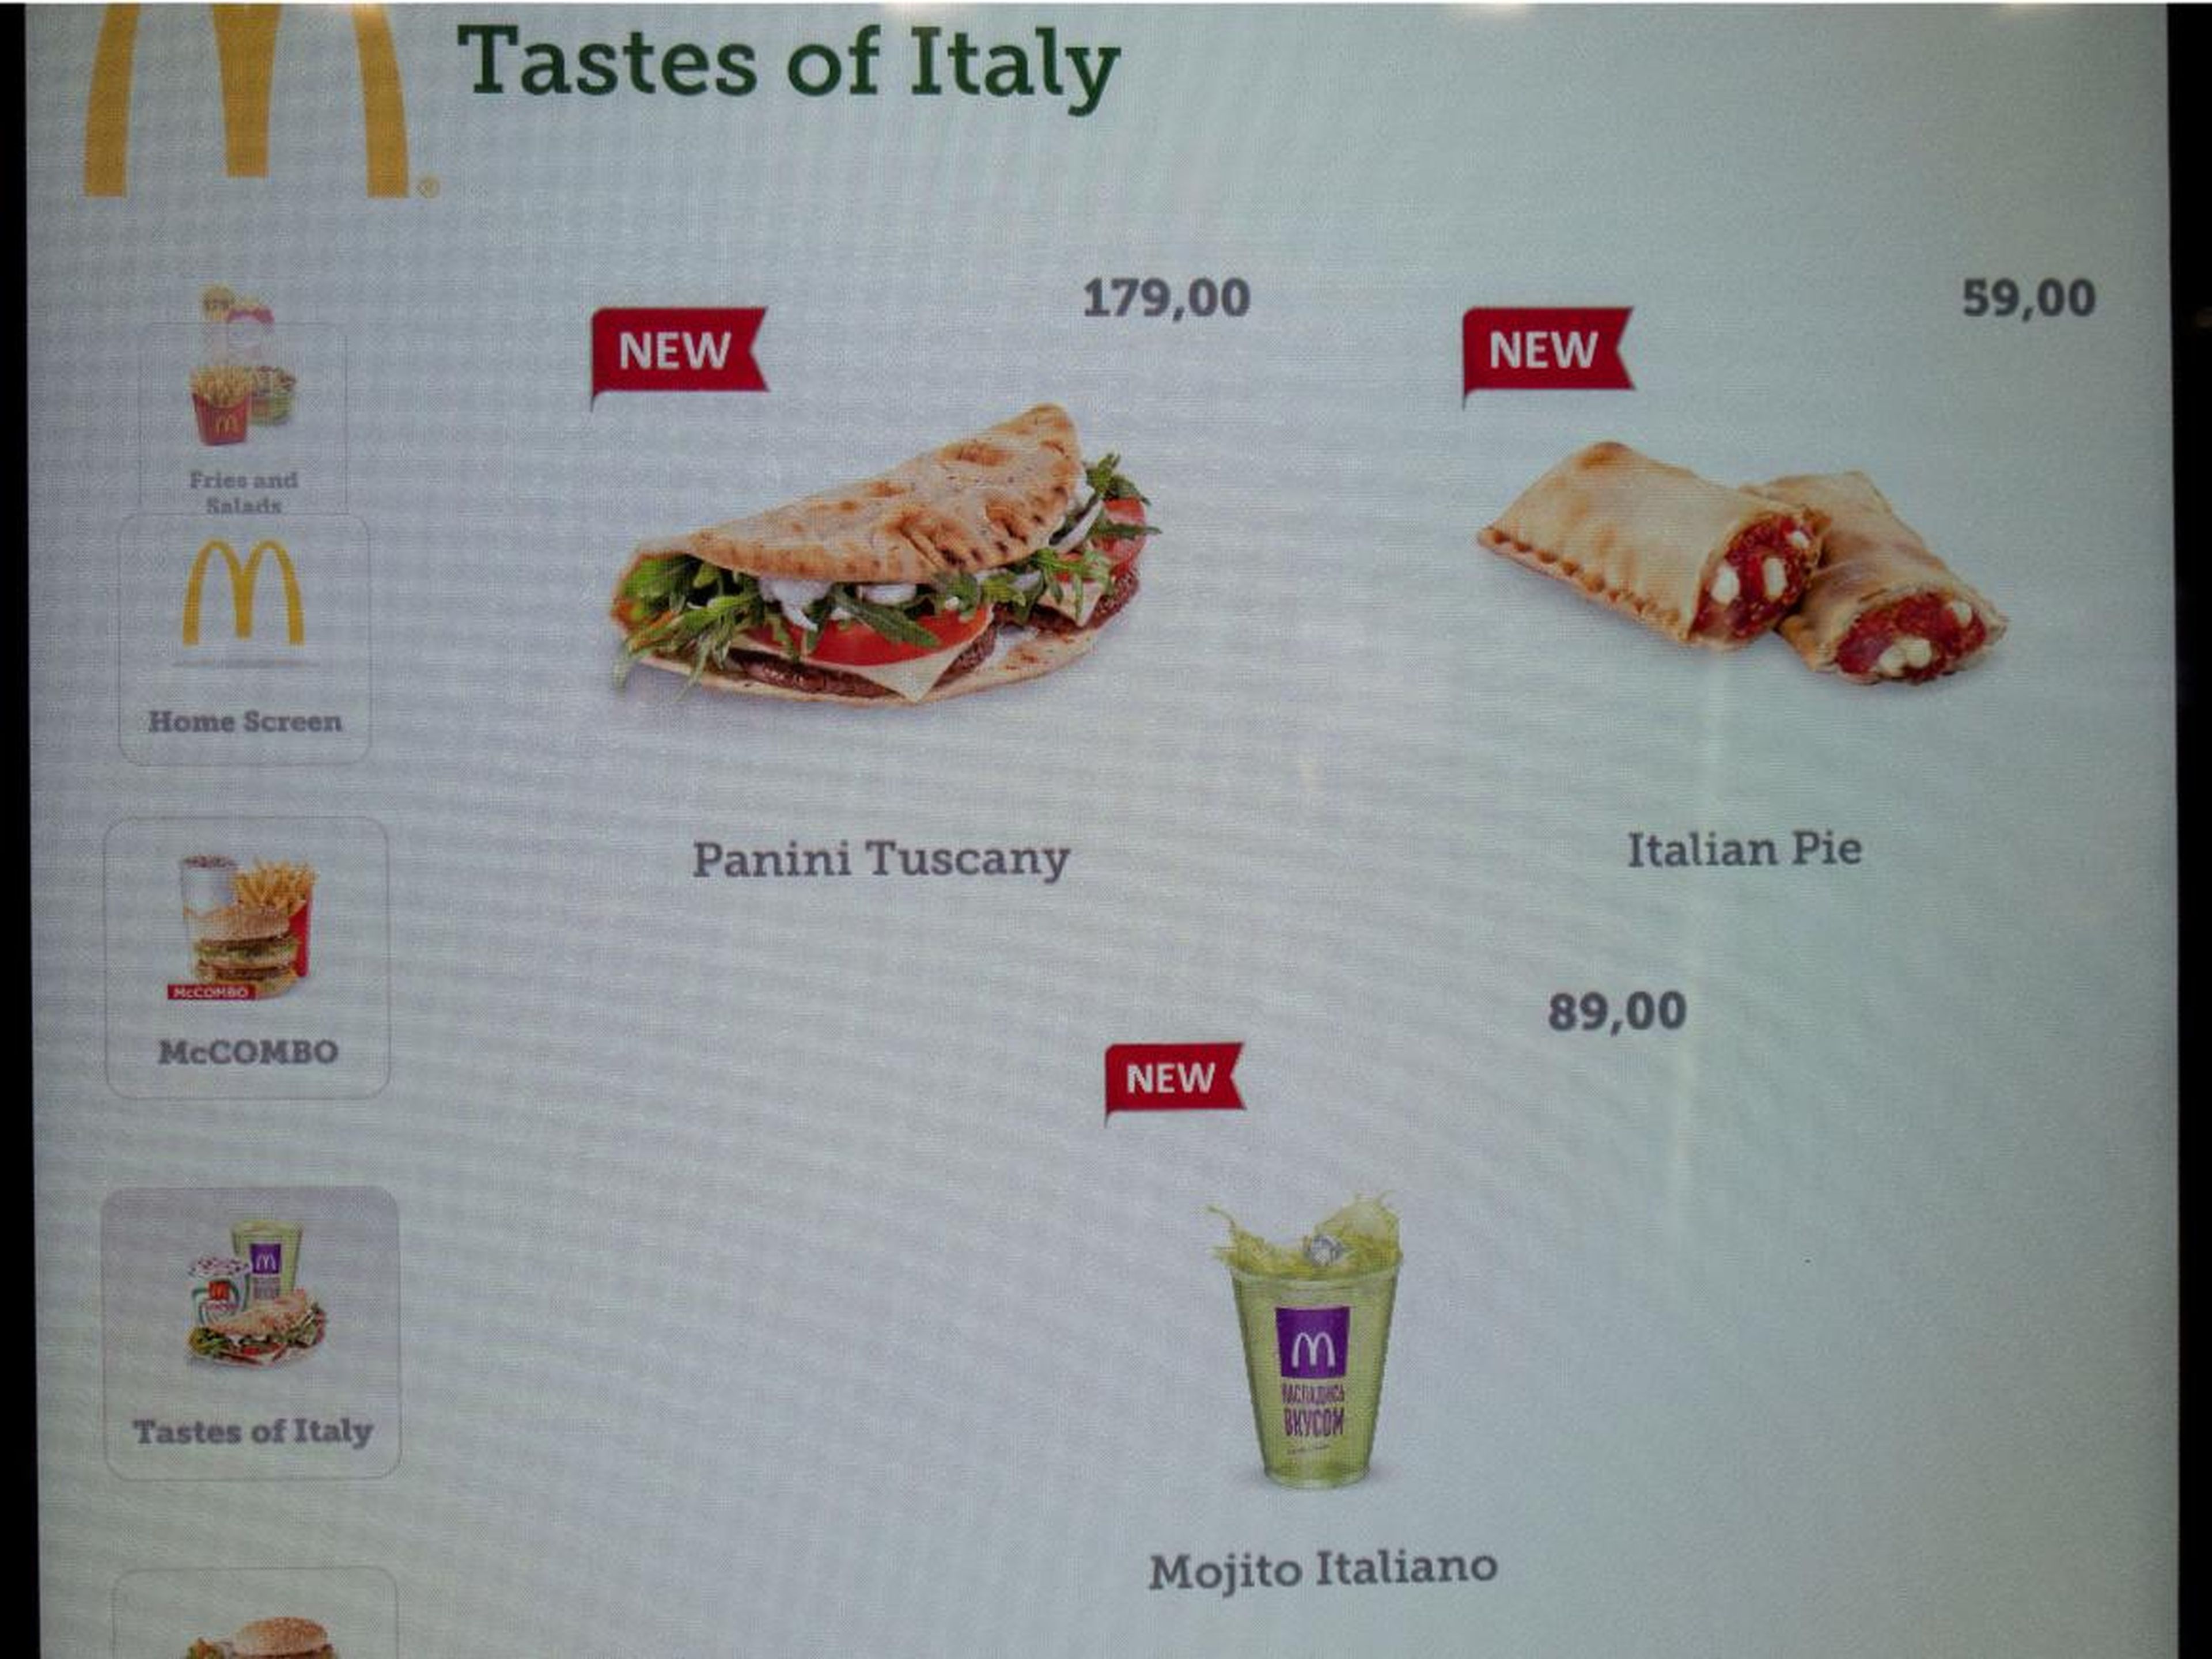 I browsed through the menu to see what a Russian McDonald's might have that a US location wouldn't.